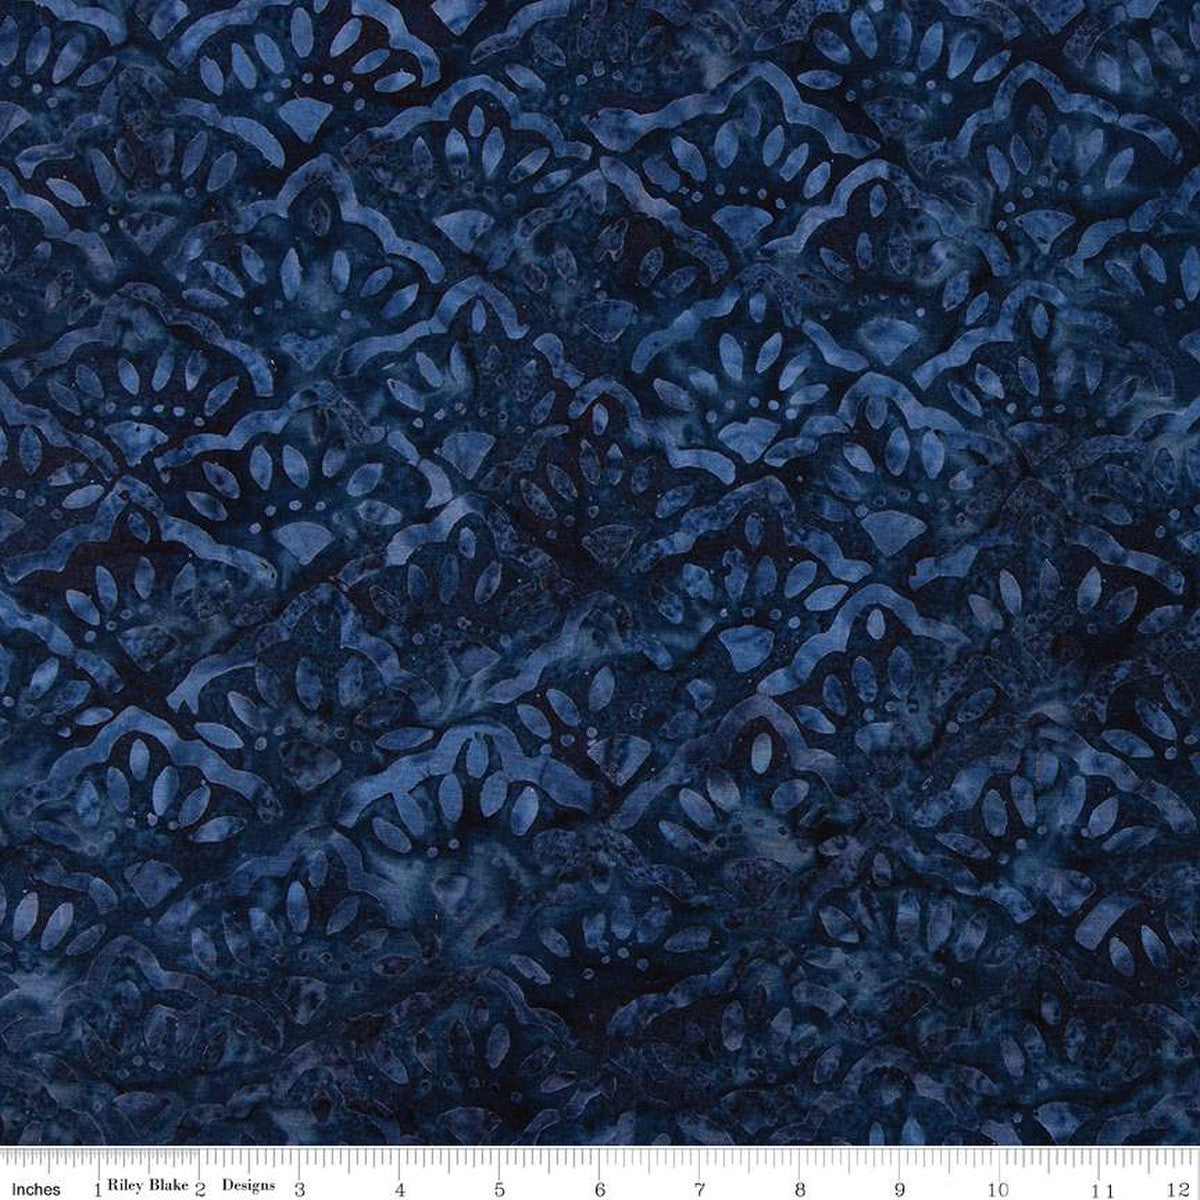 Mountain High BTHH 1329 Glaucous Yardage by Riley Blake Designers | Riley Blake Designs #BTHH1329